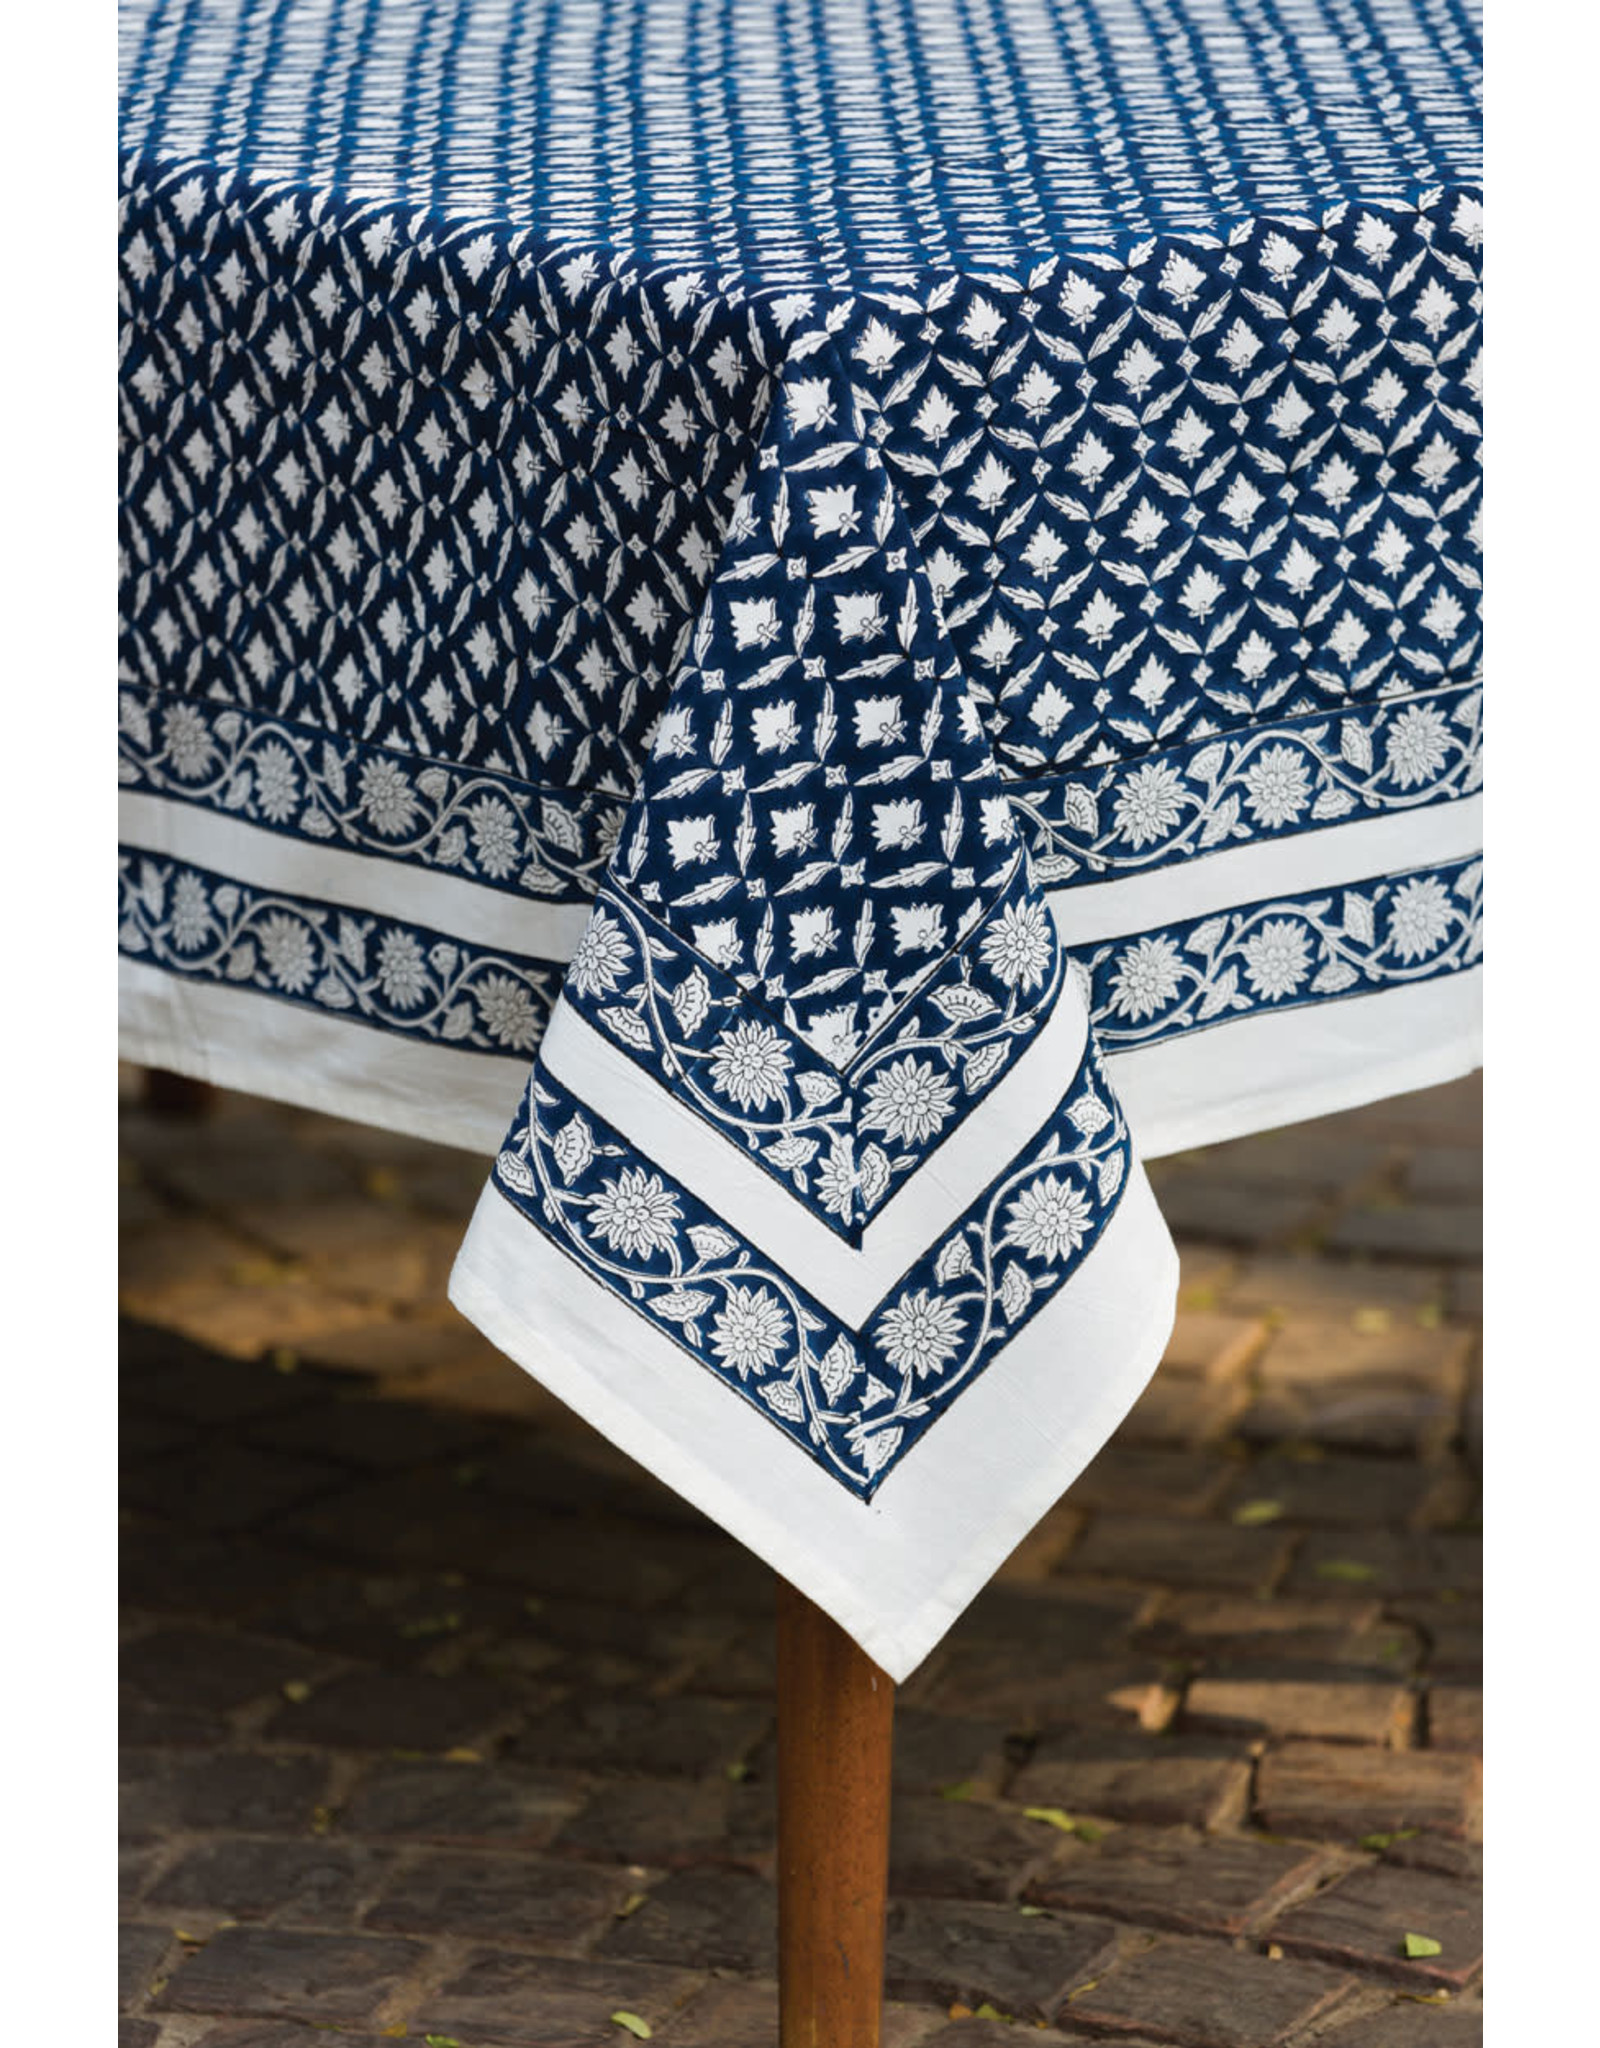 Trade roots Navy Lotus Tablecloth, 60 x 90, India